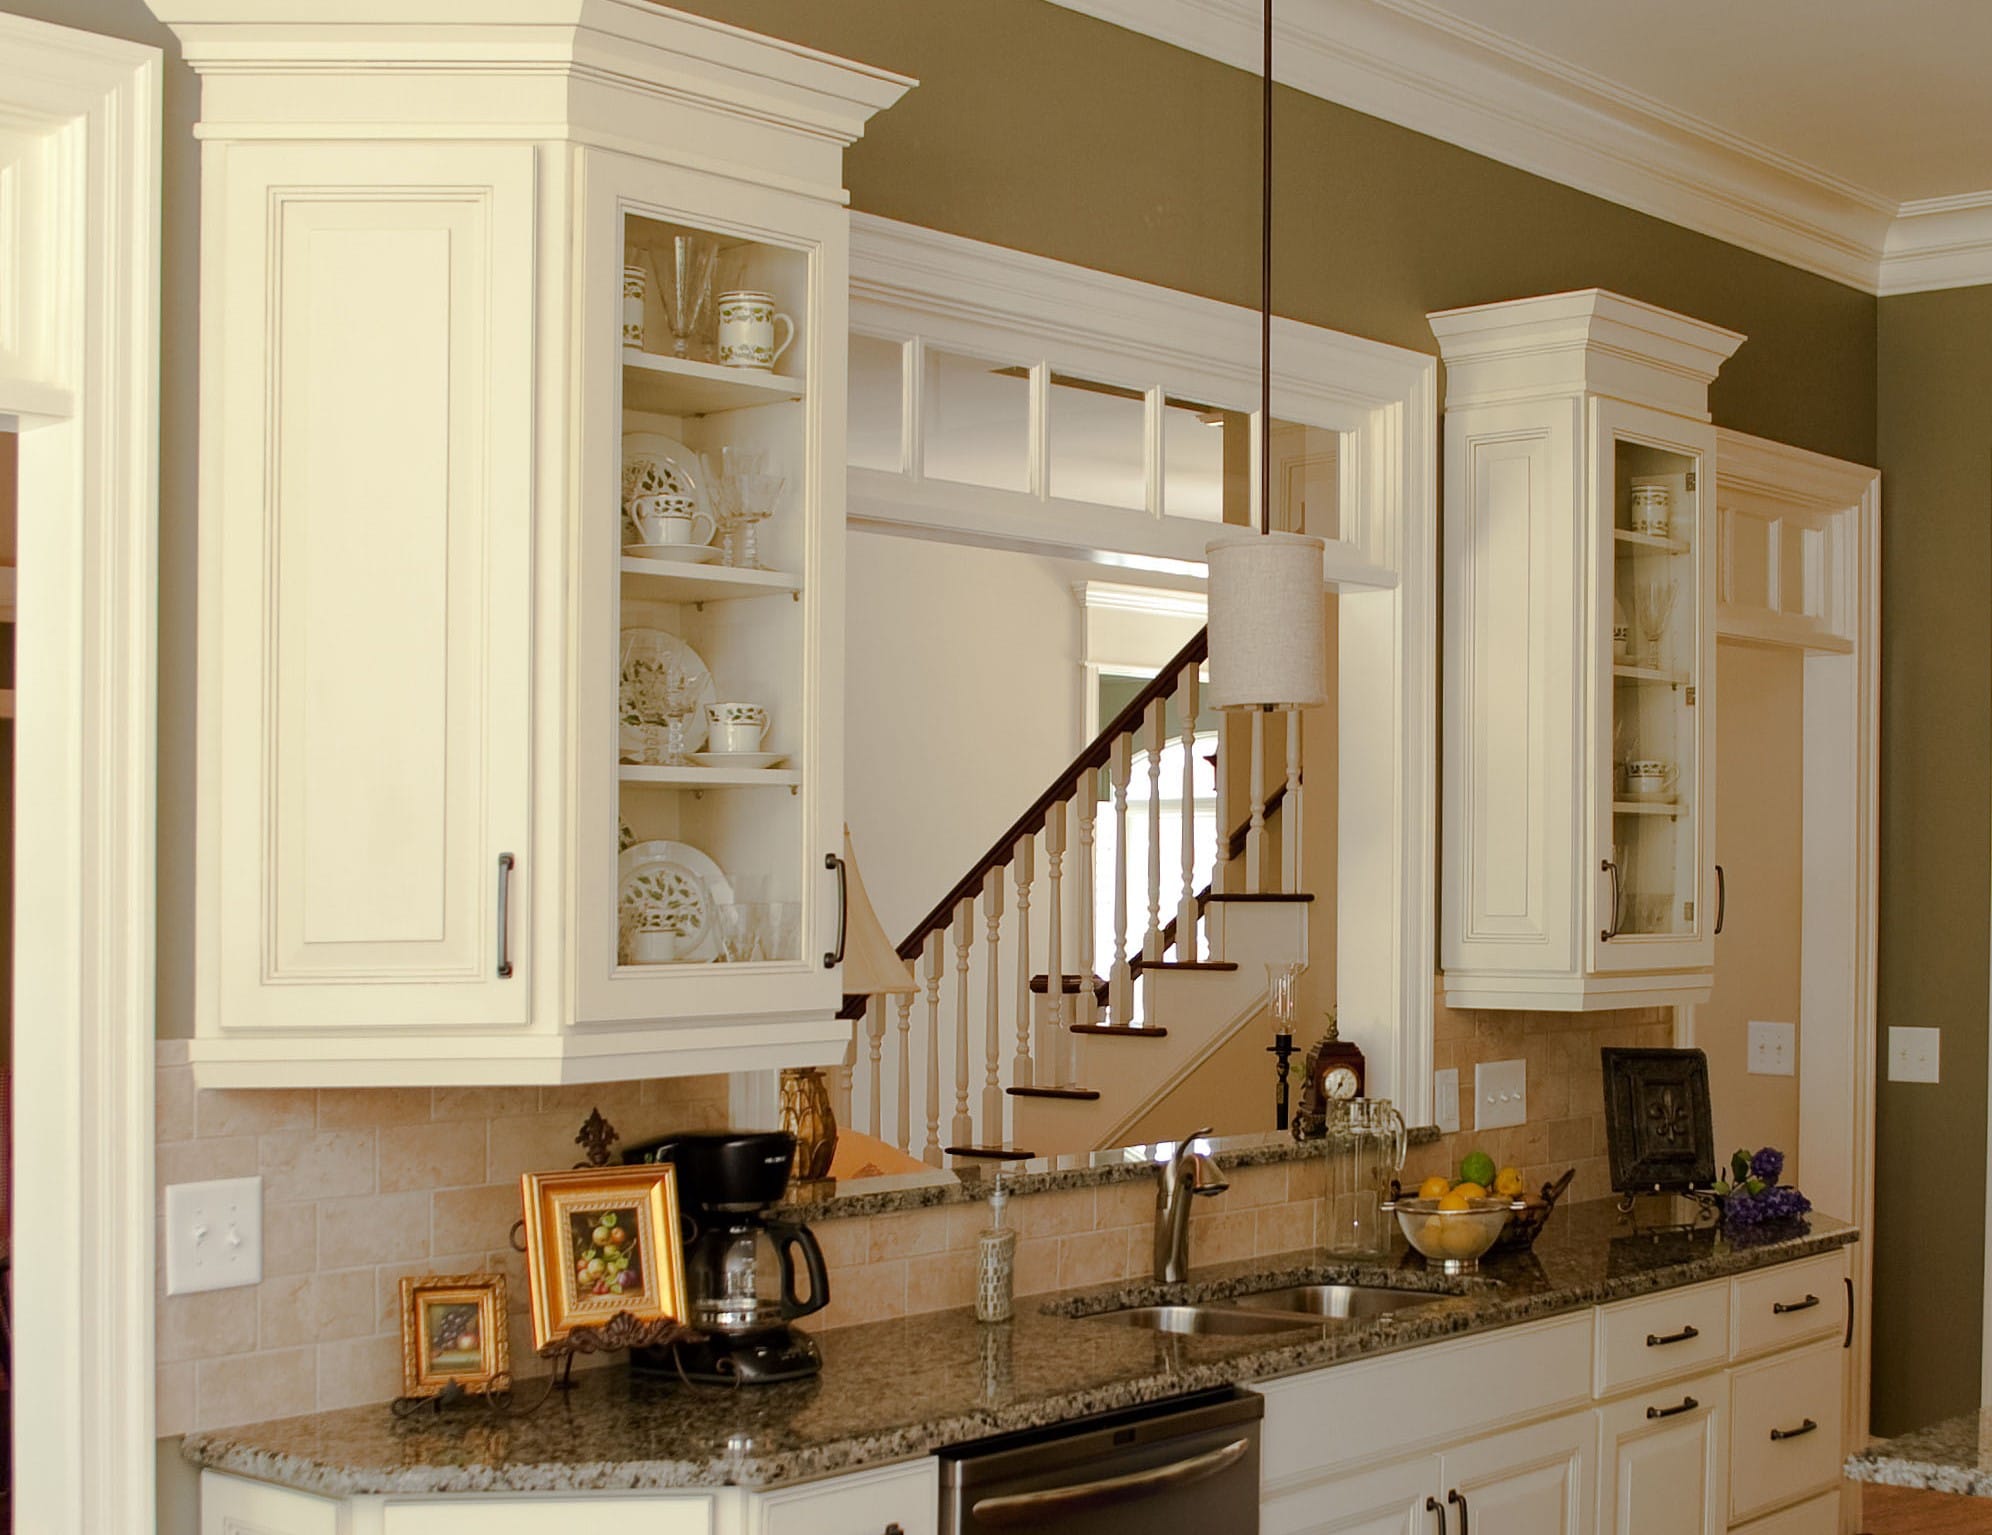 Counter-depth-upper-cabinets-with-glass-doors,